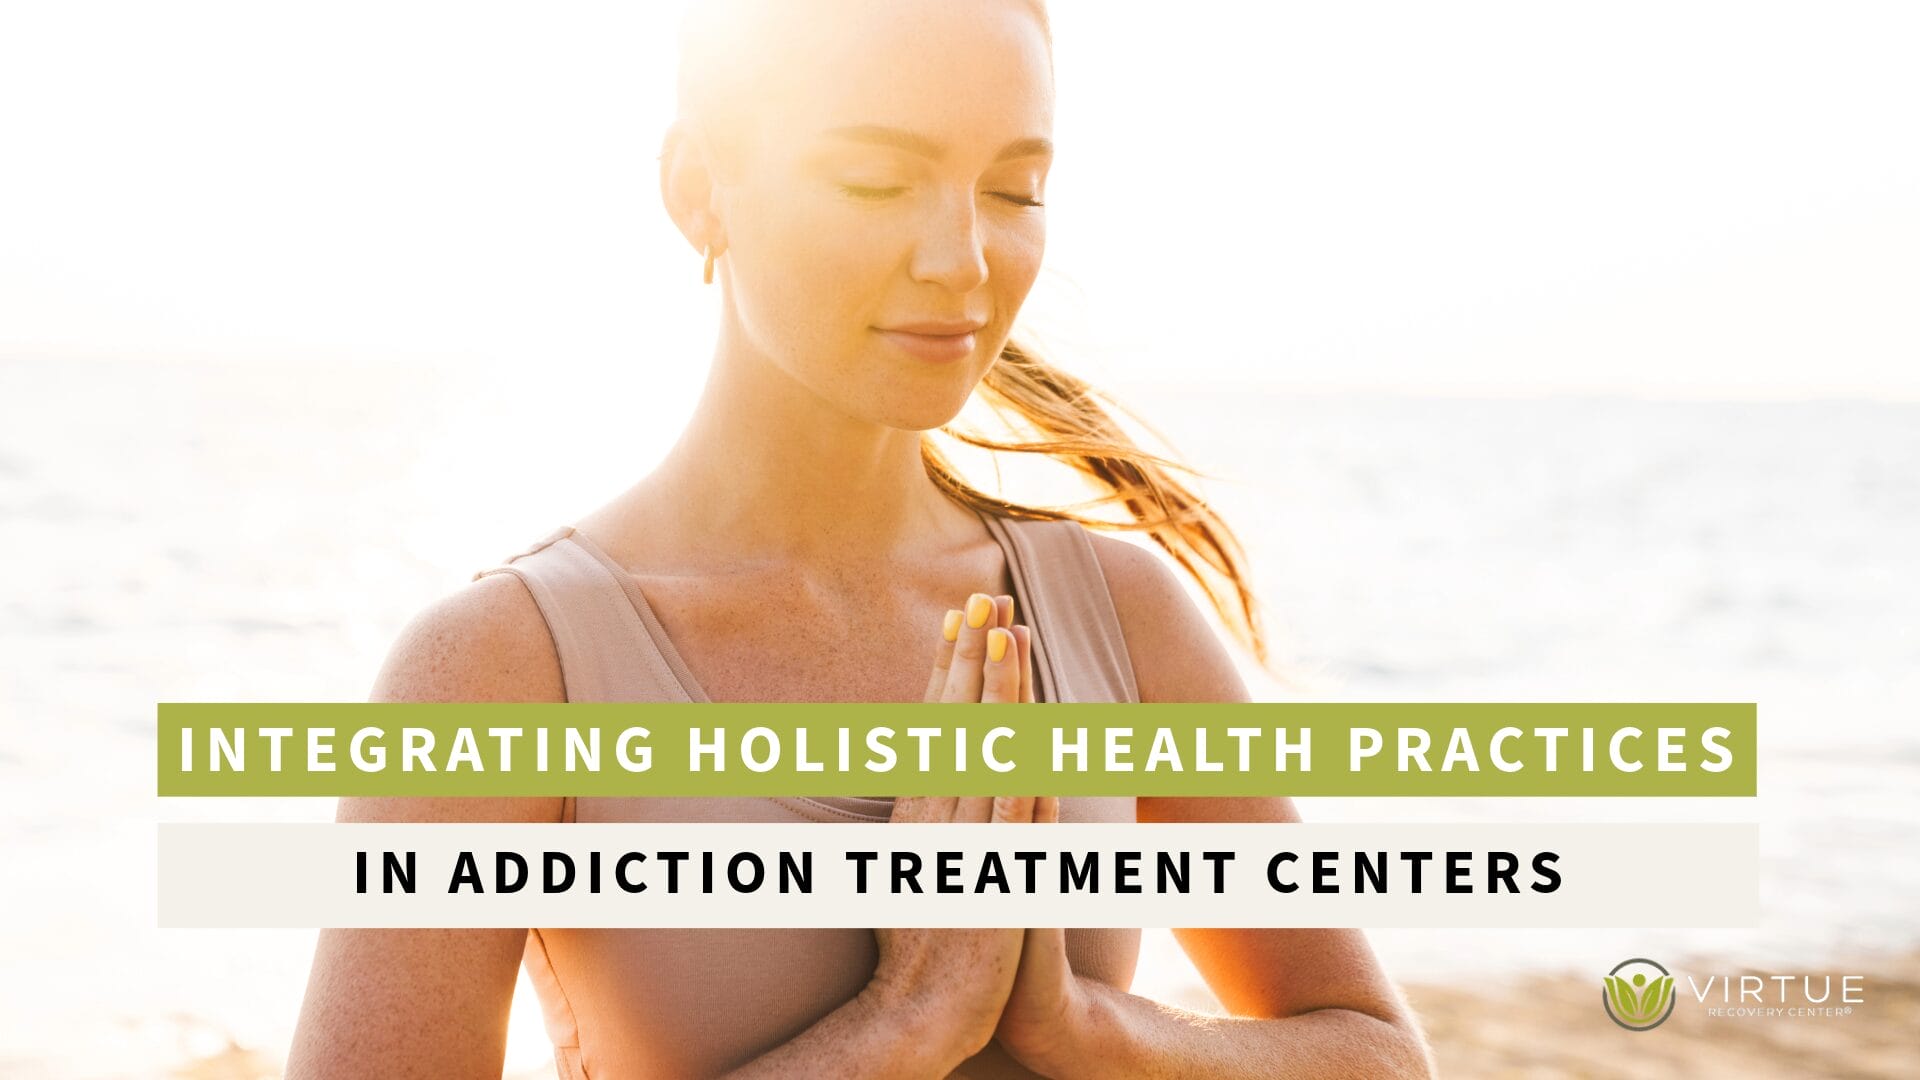 Integrating Holistic Health Practices in Addiction Treatment